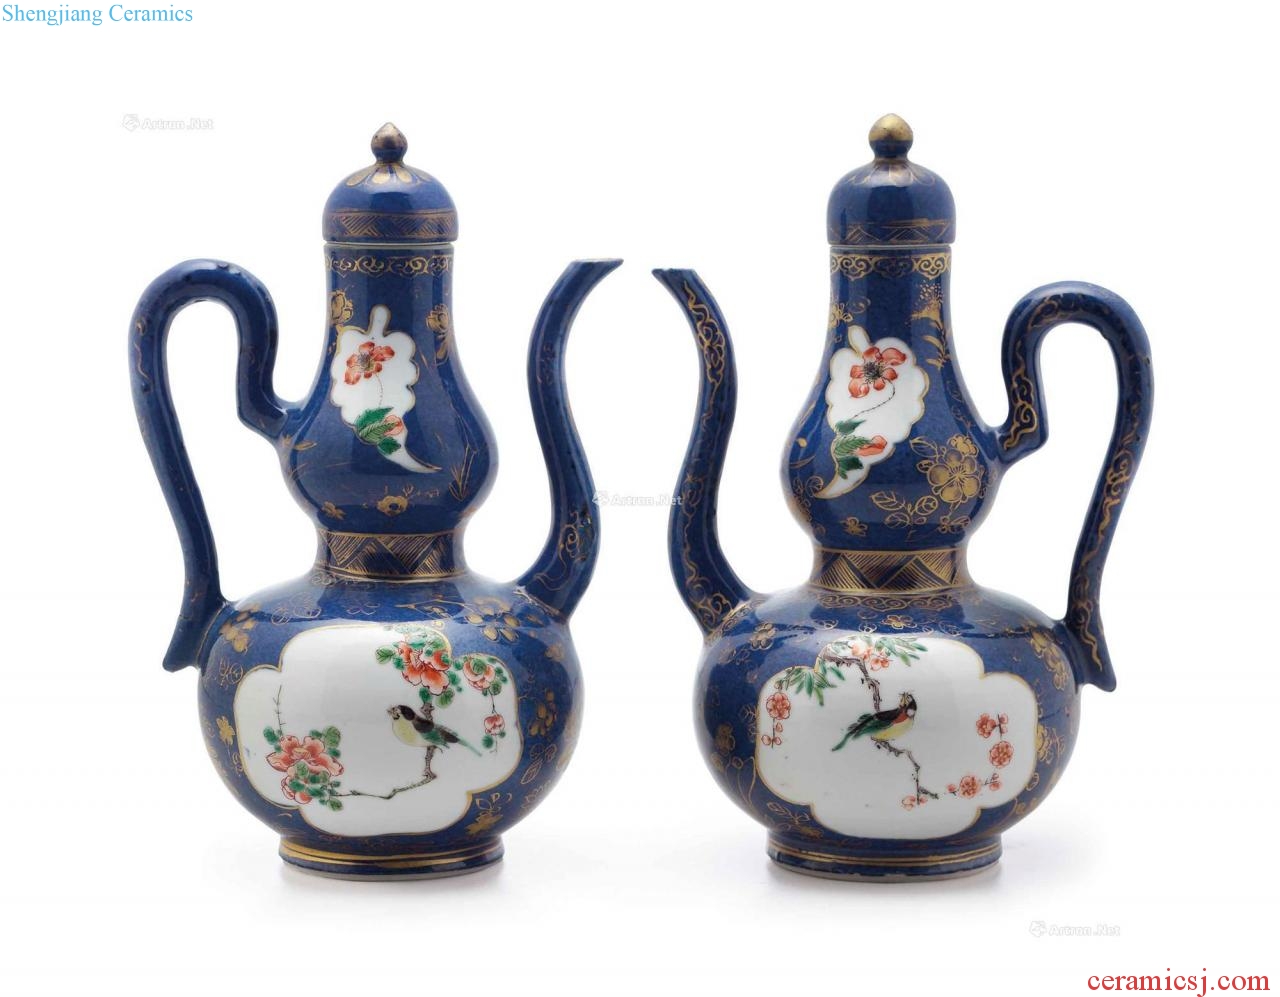 Kangxi period, 1662-1722 - A PAIR OF BLUE - GROUND FAMILLE VERTE DOUBLE - GOURD EWERS AND COVERS